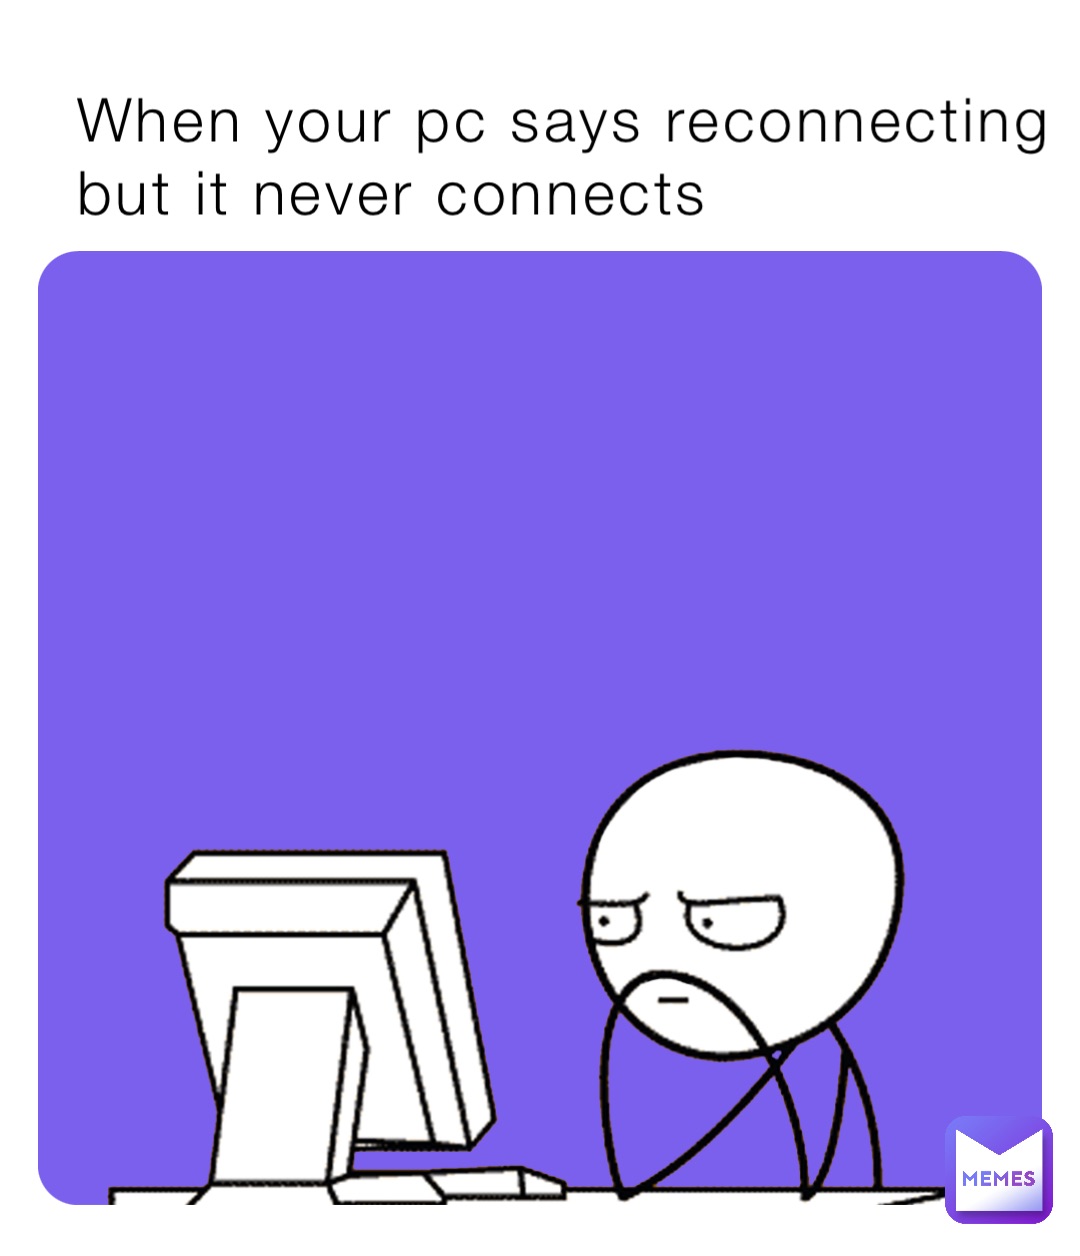 When your pc says reconnecting but it never connects